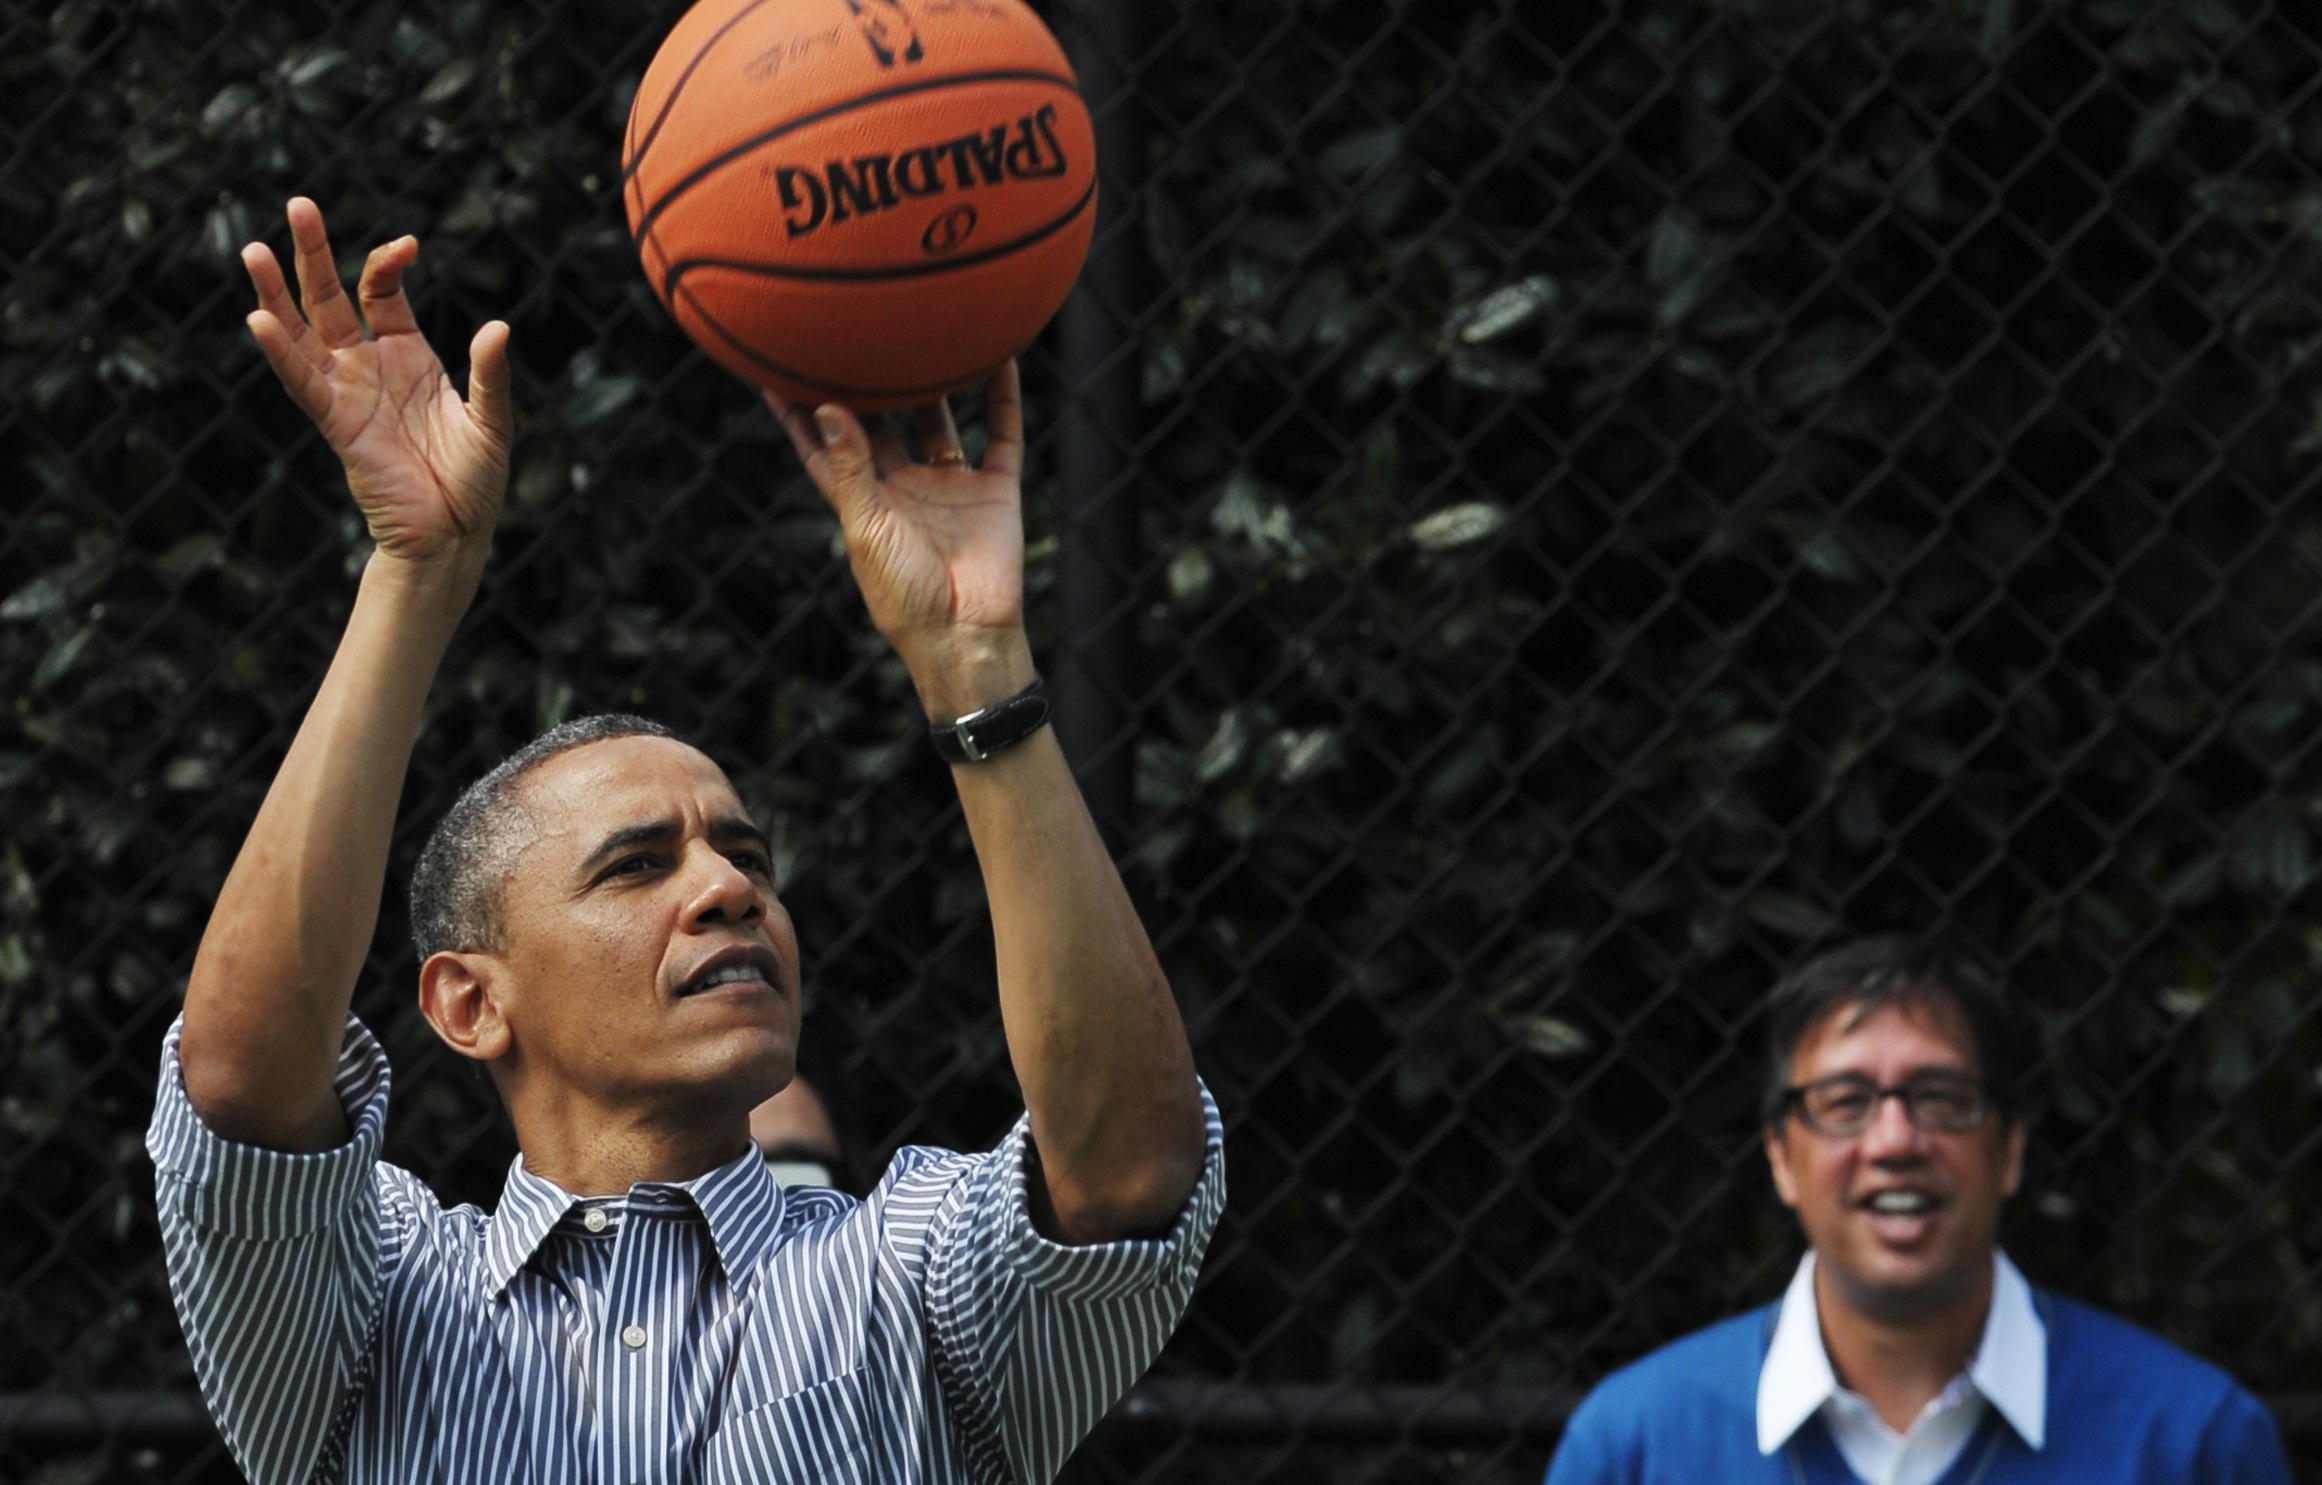 Barack Obama played Election Day basketball game with Scottie Pippen